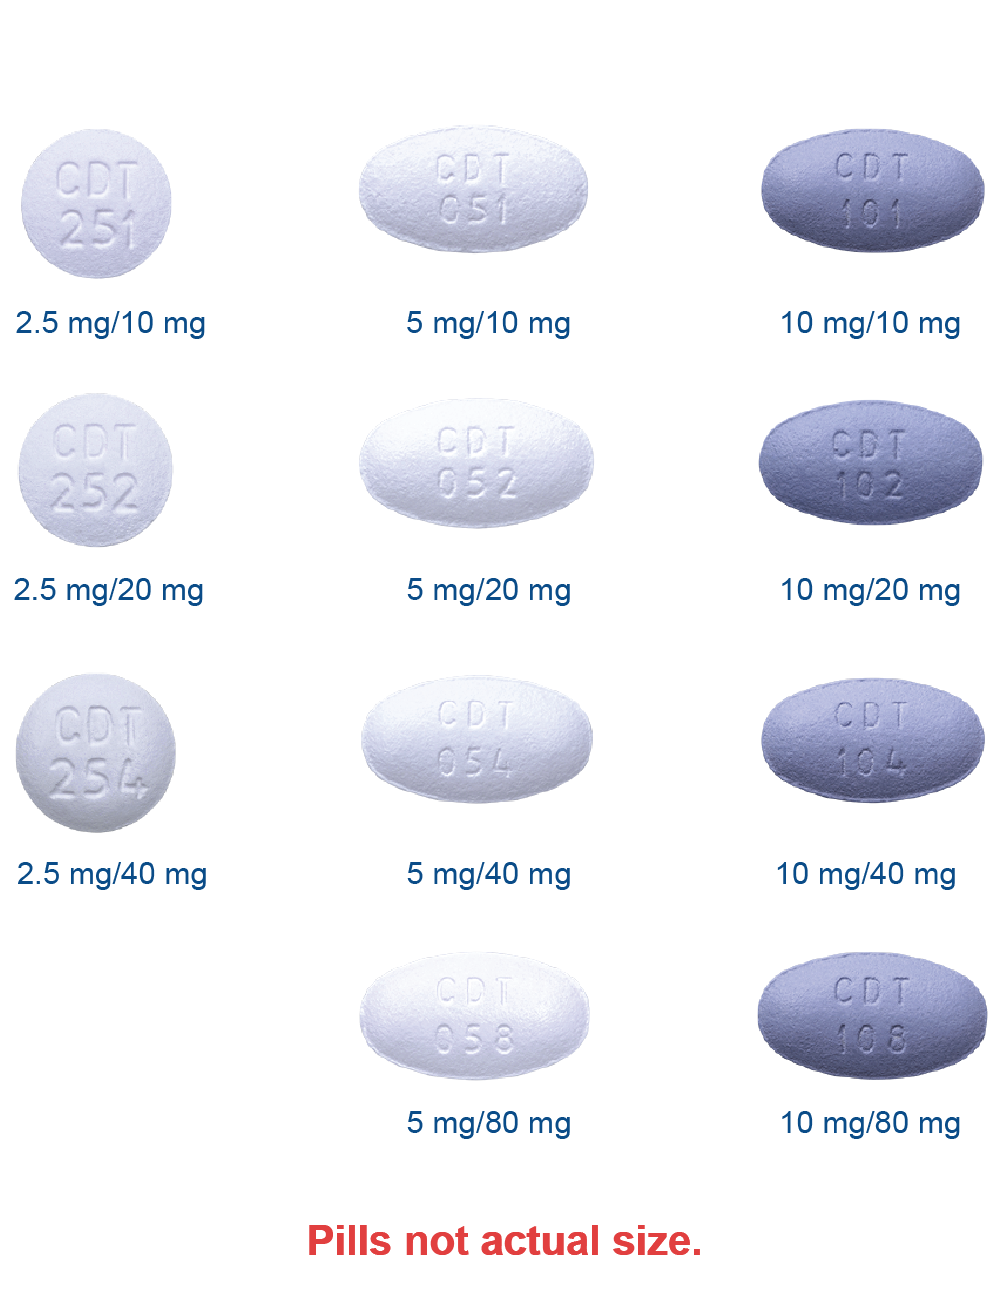 Images of pills in all available strengths